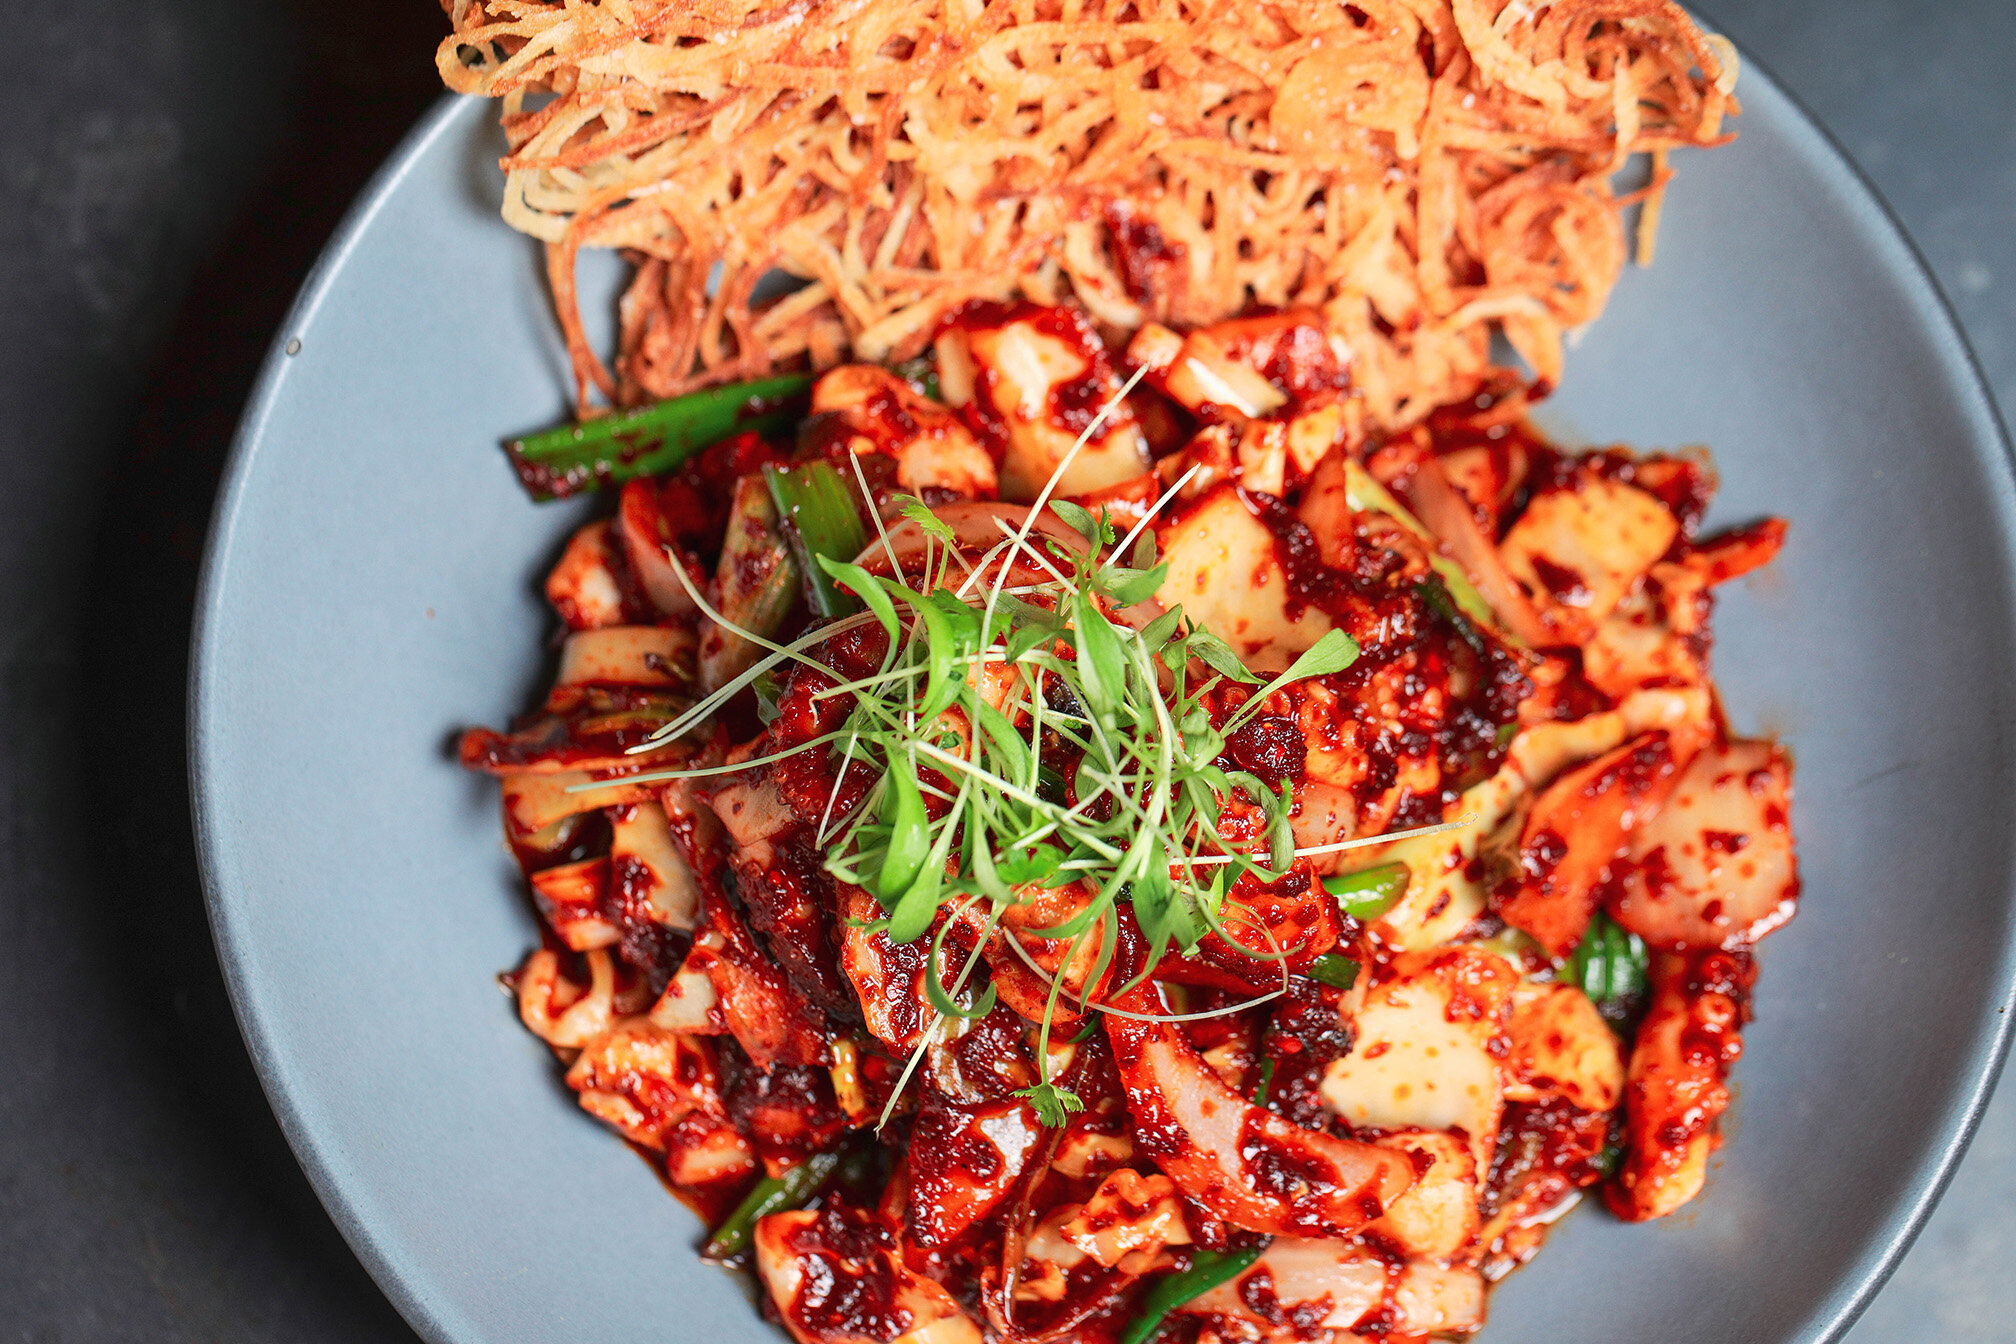 This spicy Baby Octopus(쭈꾸미 볶음) is one of the winter season's favorite bar food in Korea. It's known to be excellent for pairing any kind of drink, made with baby octopus, bird&rsquo;s eye chili, onion, micro cilantro, and potato nest. Enjoy pairing 